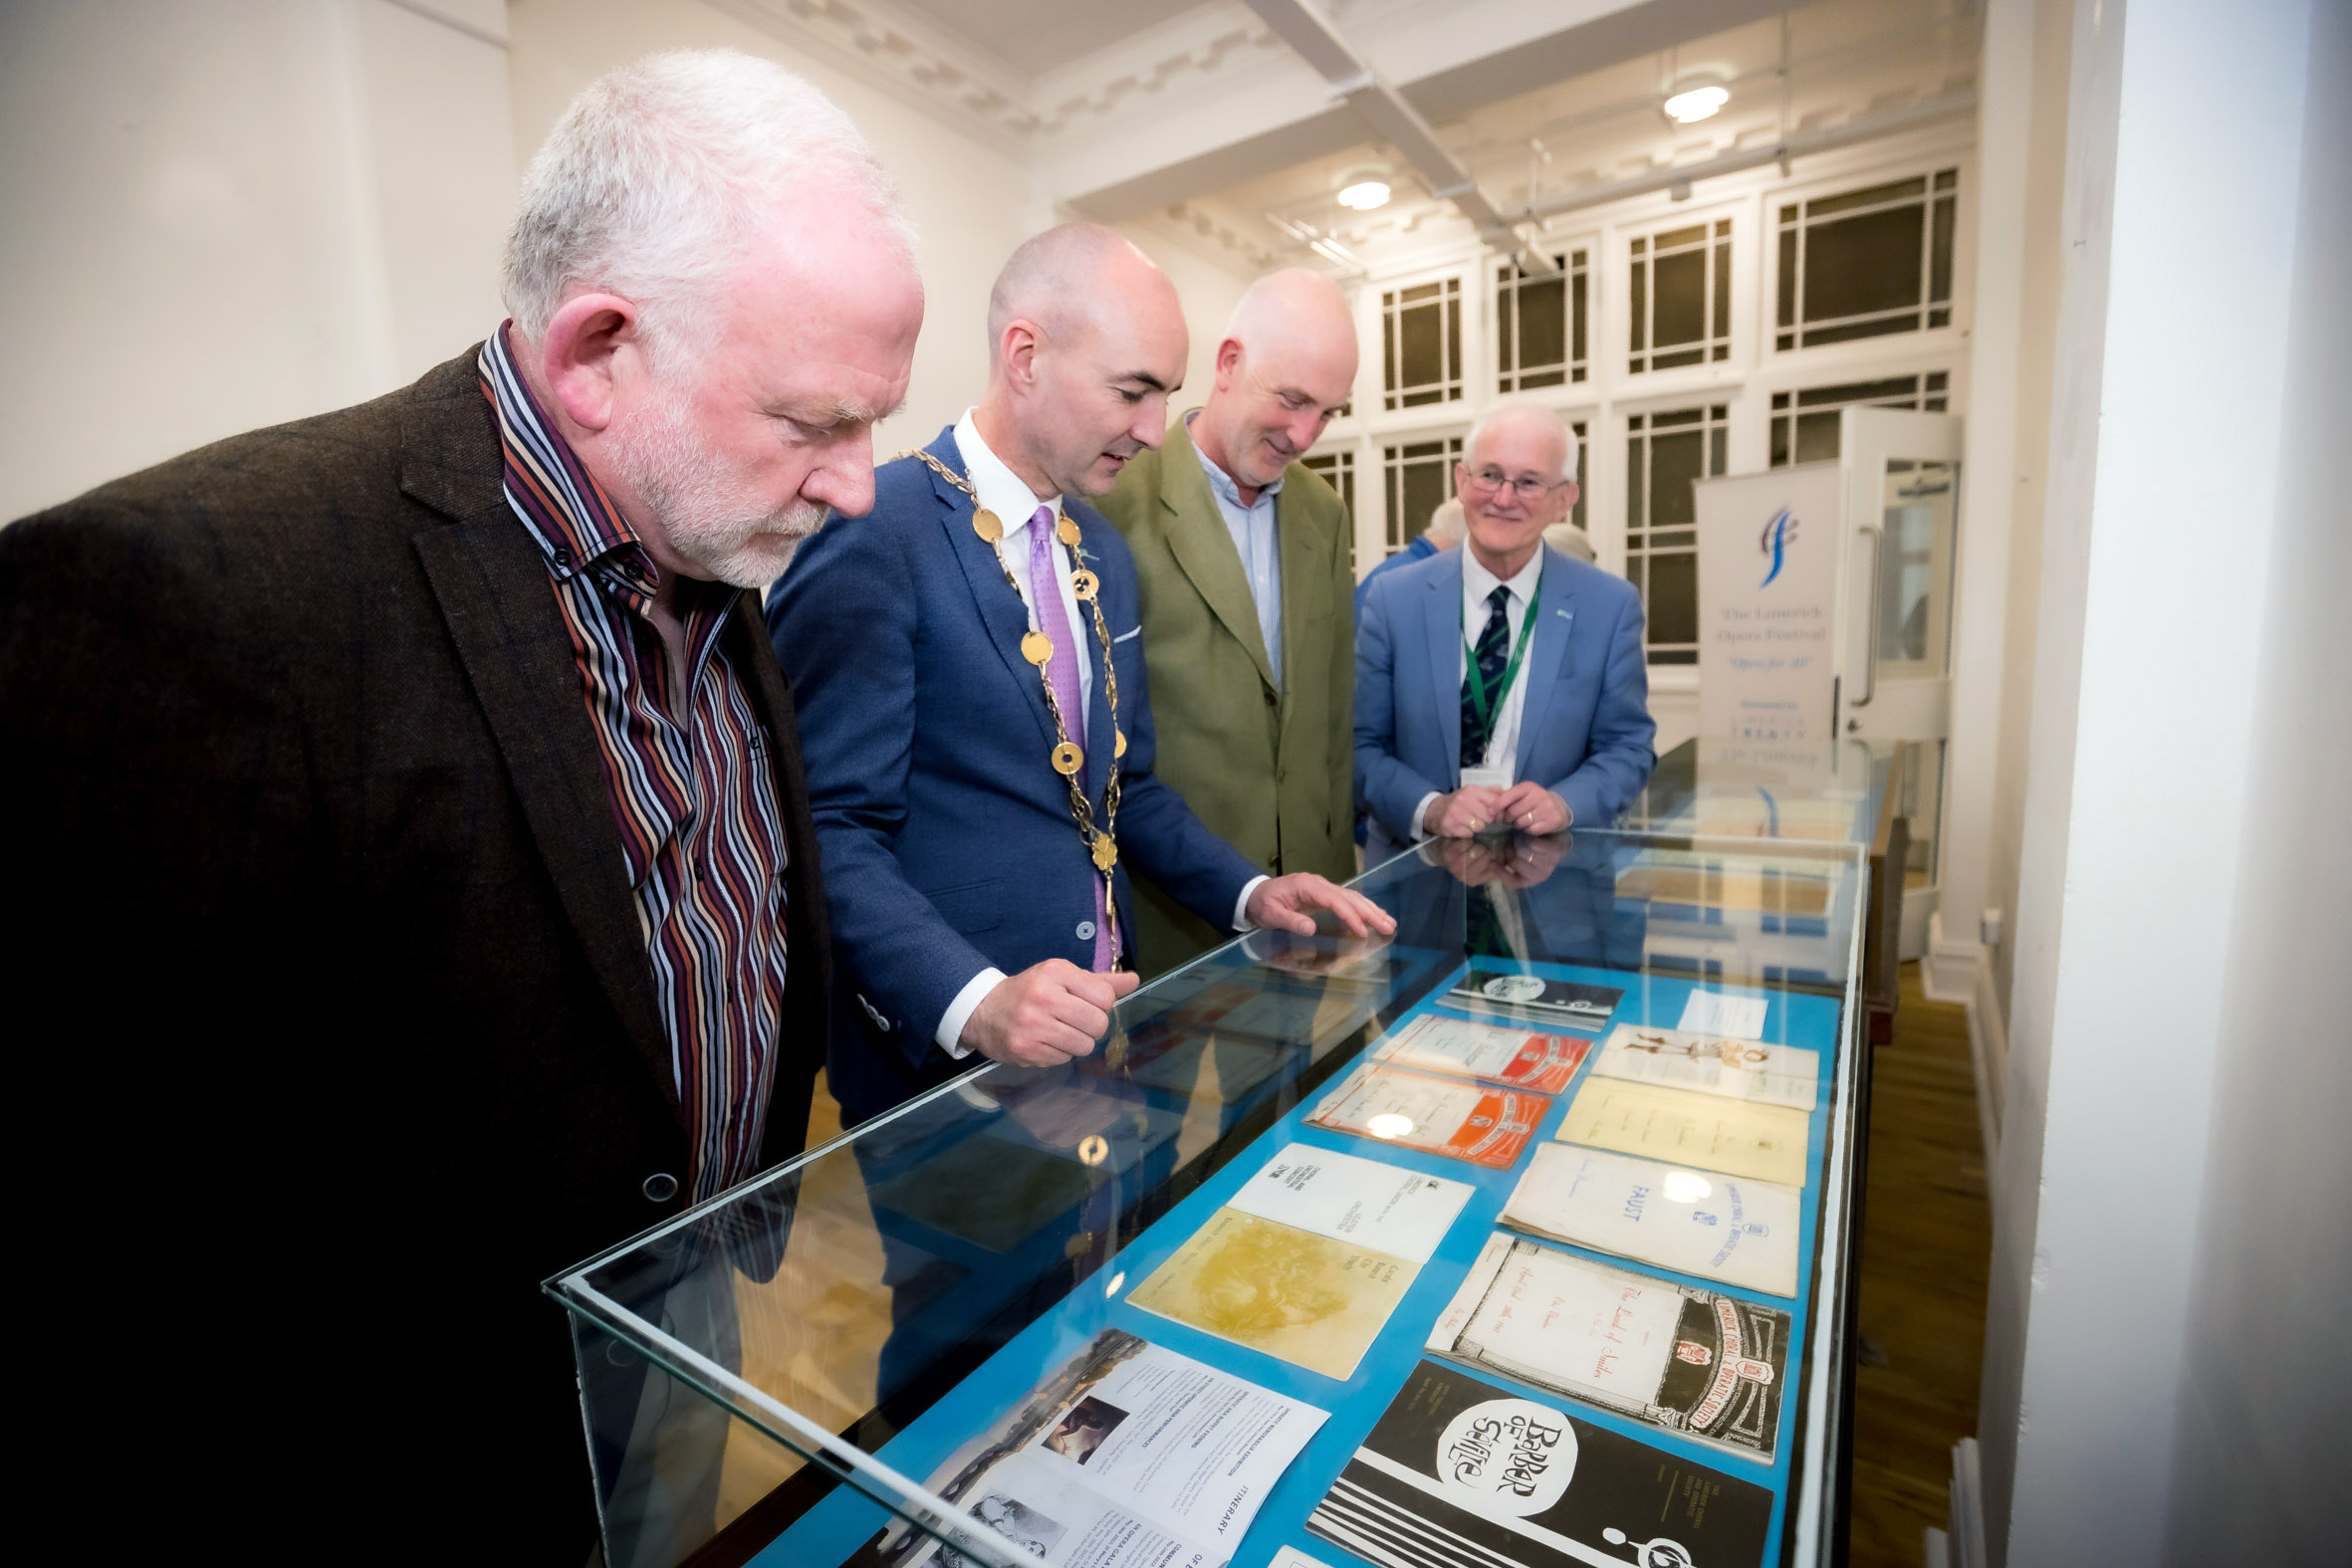 Limerick Operatic Memorabilia Exhibition as part of the Limerick Opera Festival - Pictured above are Ger Reidy, Director of the Limerick Opera Festival, Mayor of Limerick City and County Council, Daniel Butler, Tom Hackett, Limerick Opera Festival and Dr Matthew Potter, Limerick City Museum. Picture: Keith Wiseman.